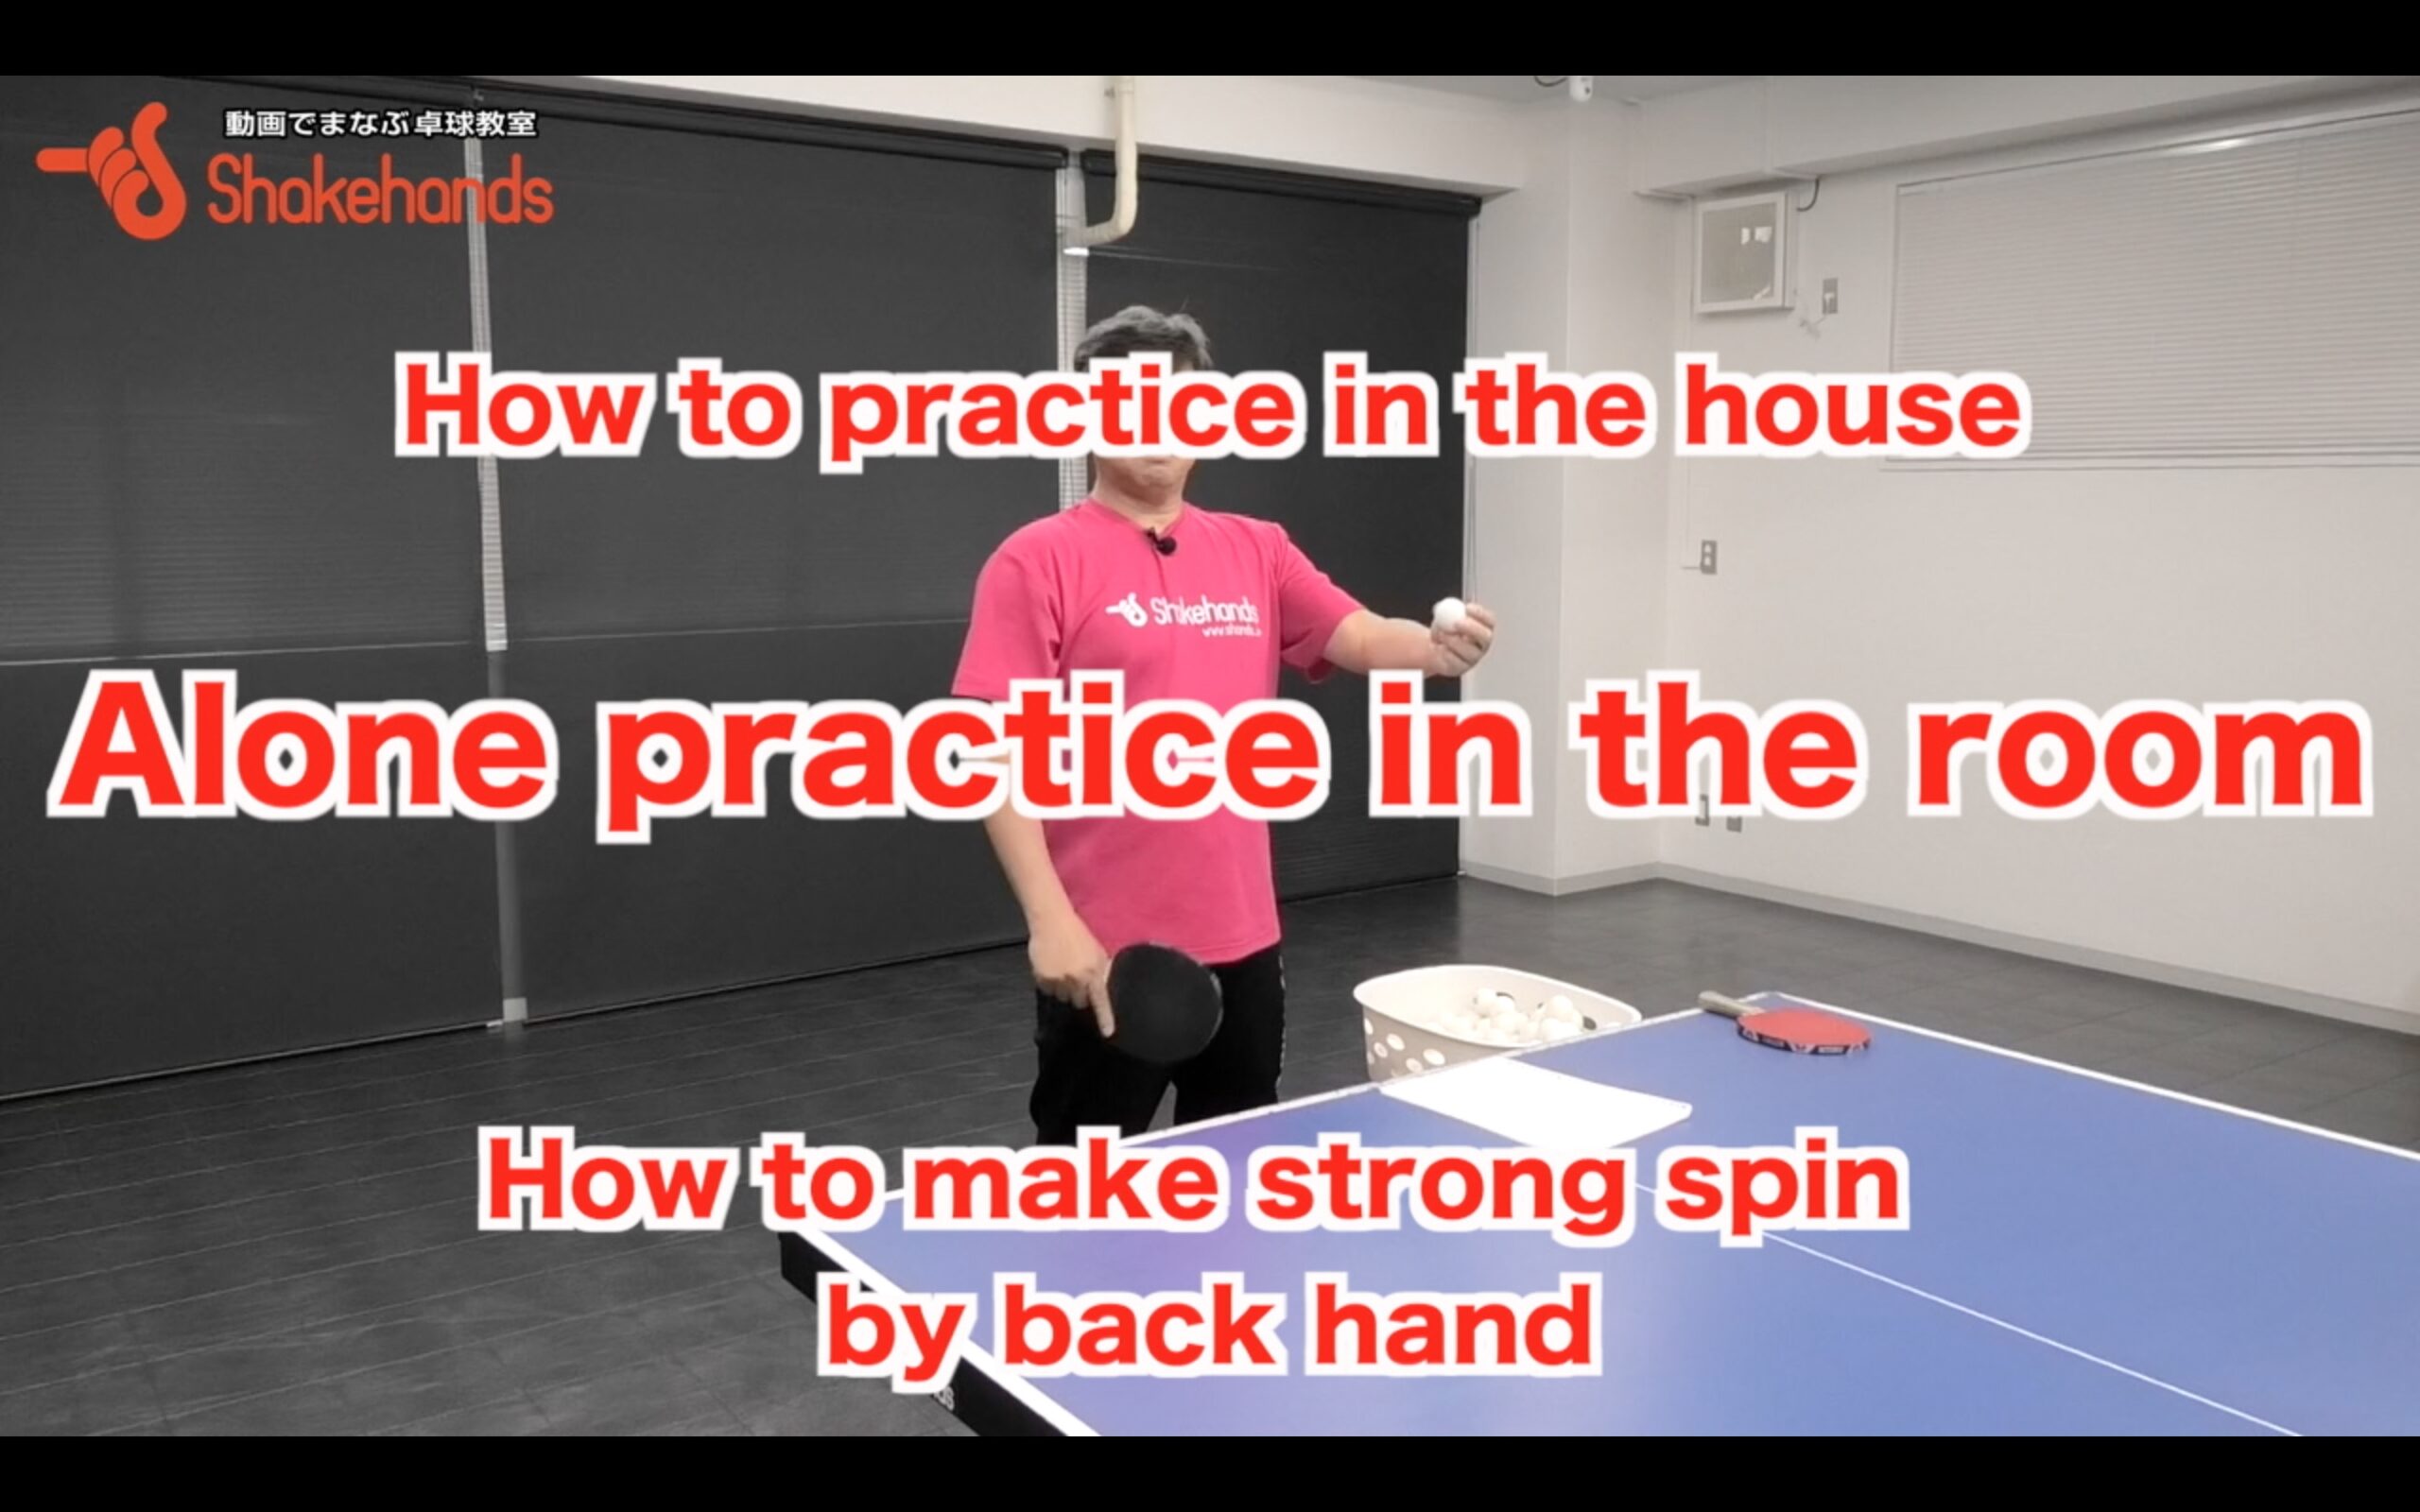 How to make strong spin by back hand